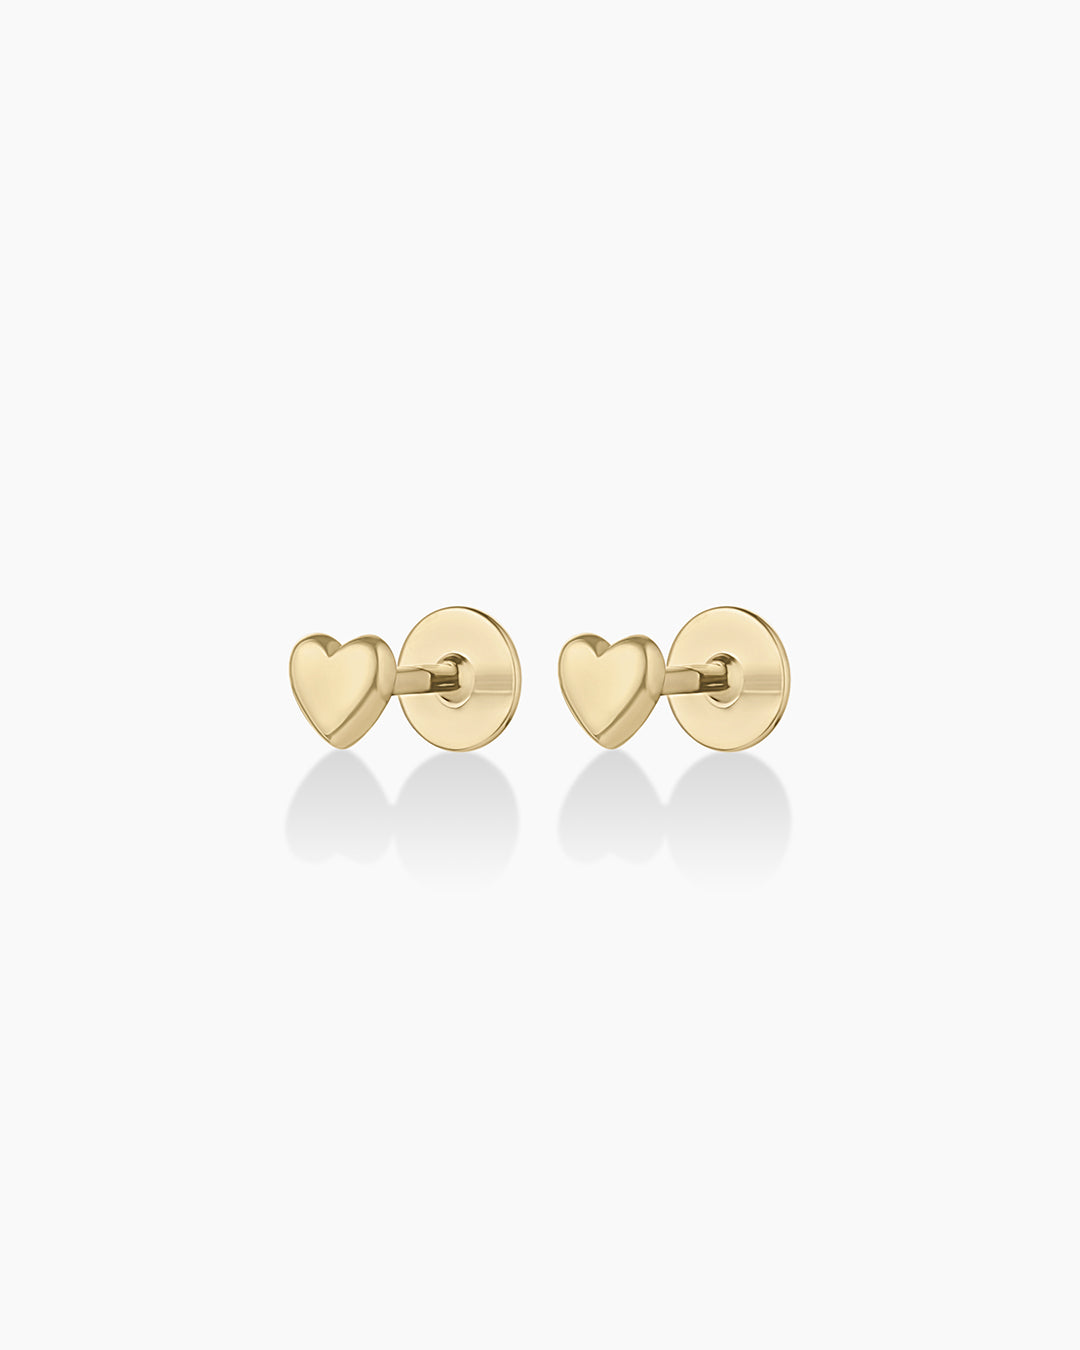 Statement Flat Back Earrings for Women Hypoallergenic: 5 Pairs 14K Gold Tiny Stud Earrings in Stainless Steel Lightweight Round Star Square Heart